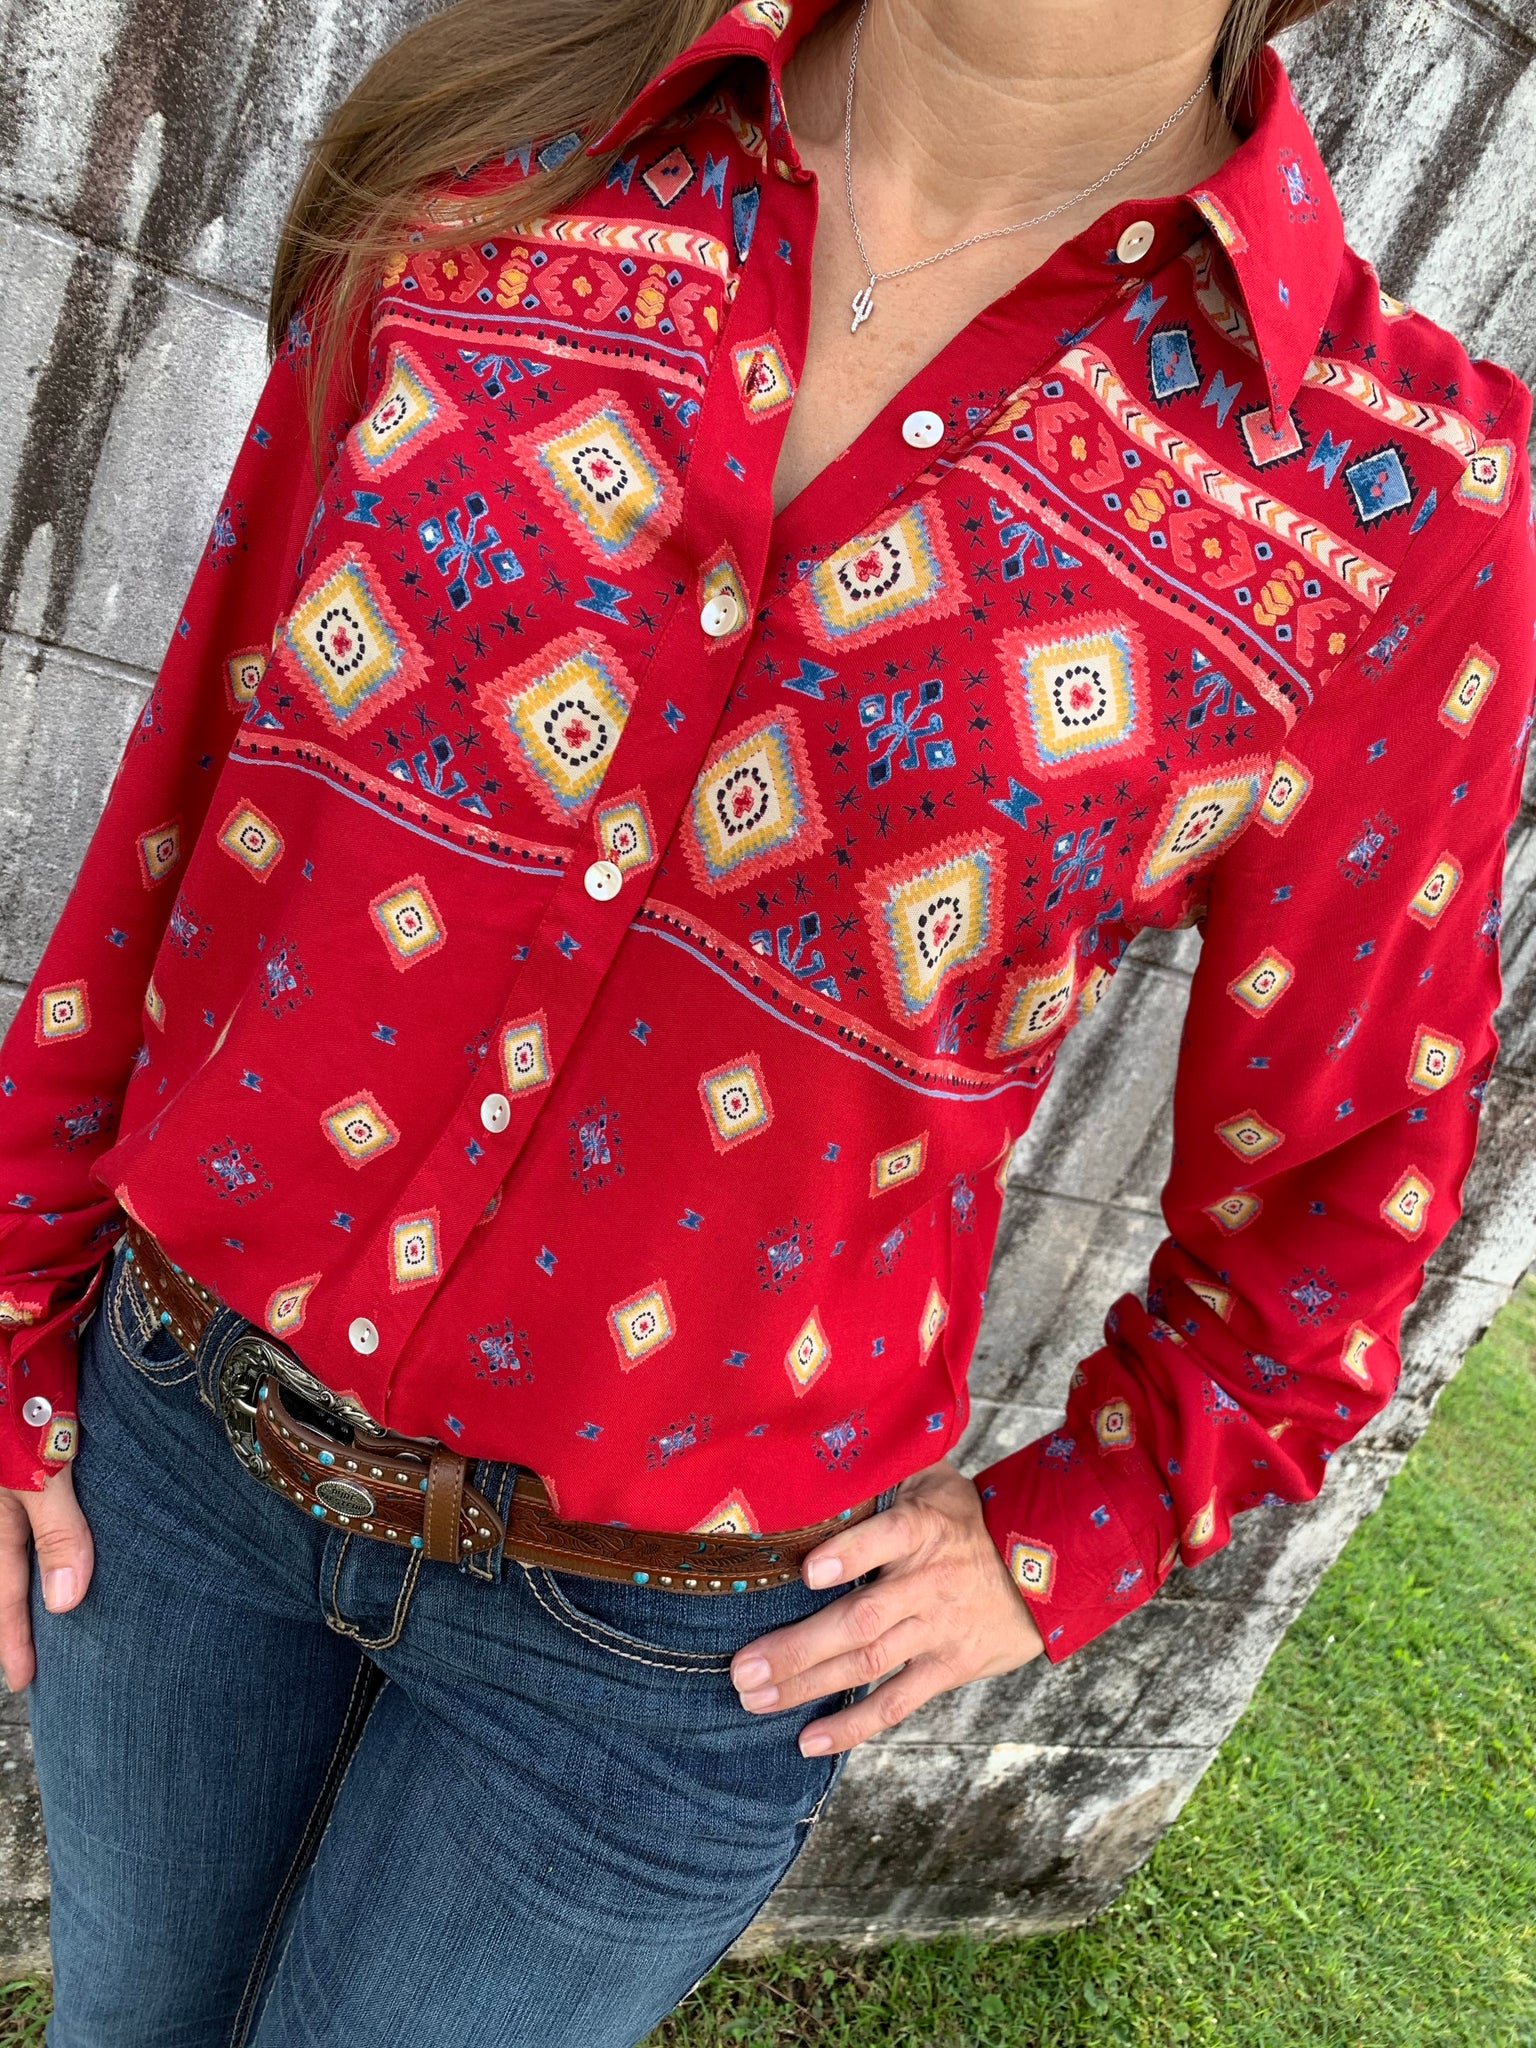 03-050-0590-3007 Ladies Roper Studio West Collection L/S Shirt Red Print